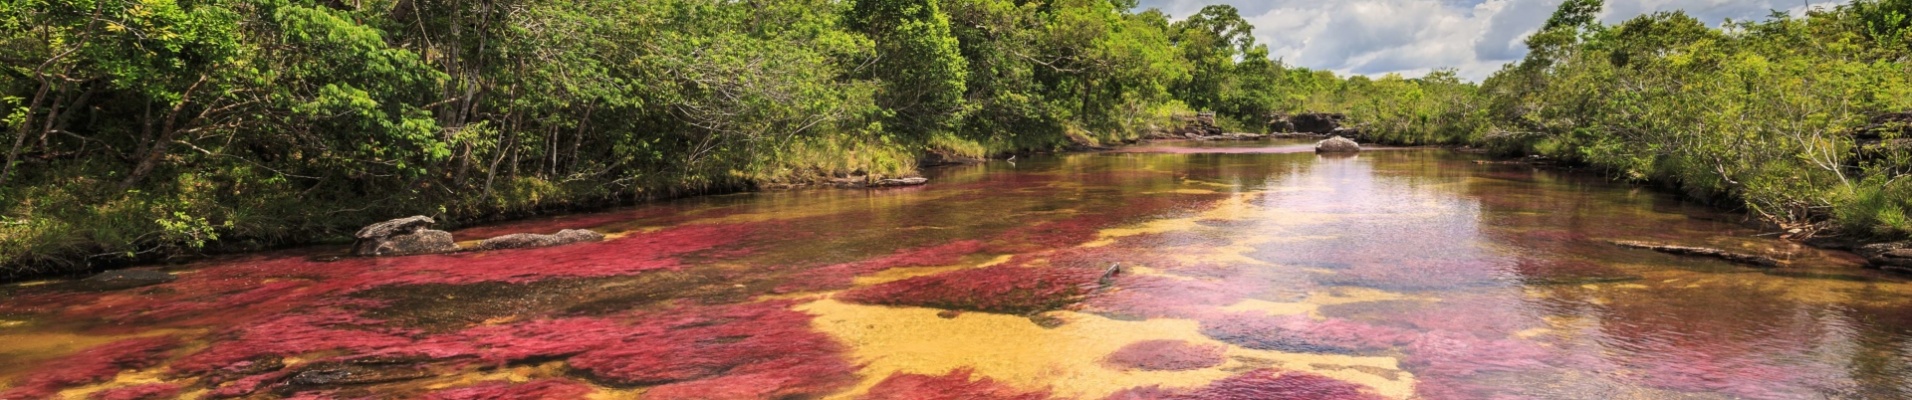 panra-cano-cristales-colombie